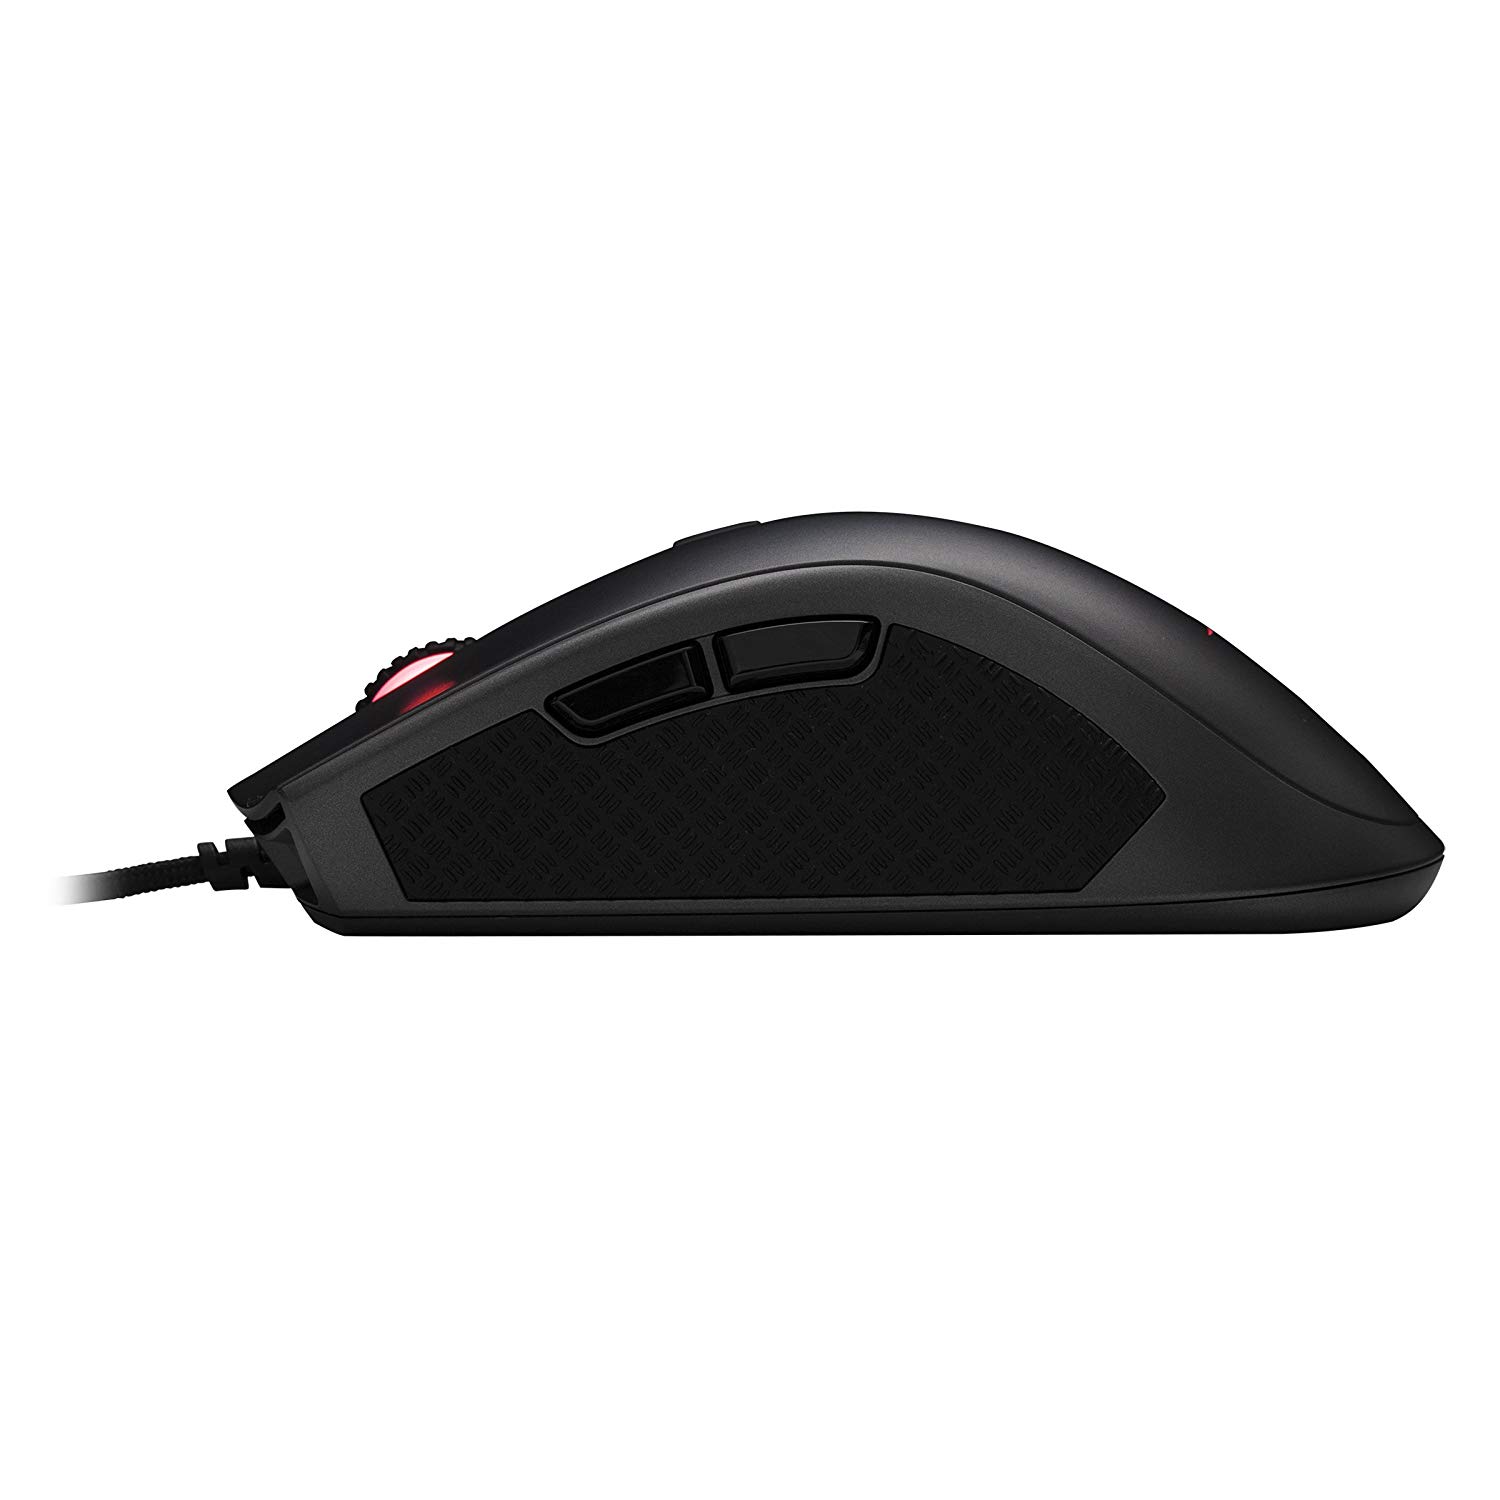 HyperX PULSEFIRE FPS PRO GAMING MOUSE IN (HX-MC003B)